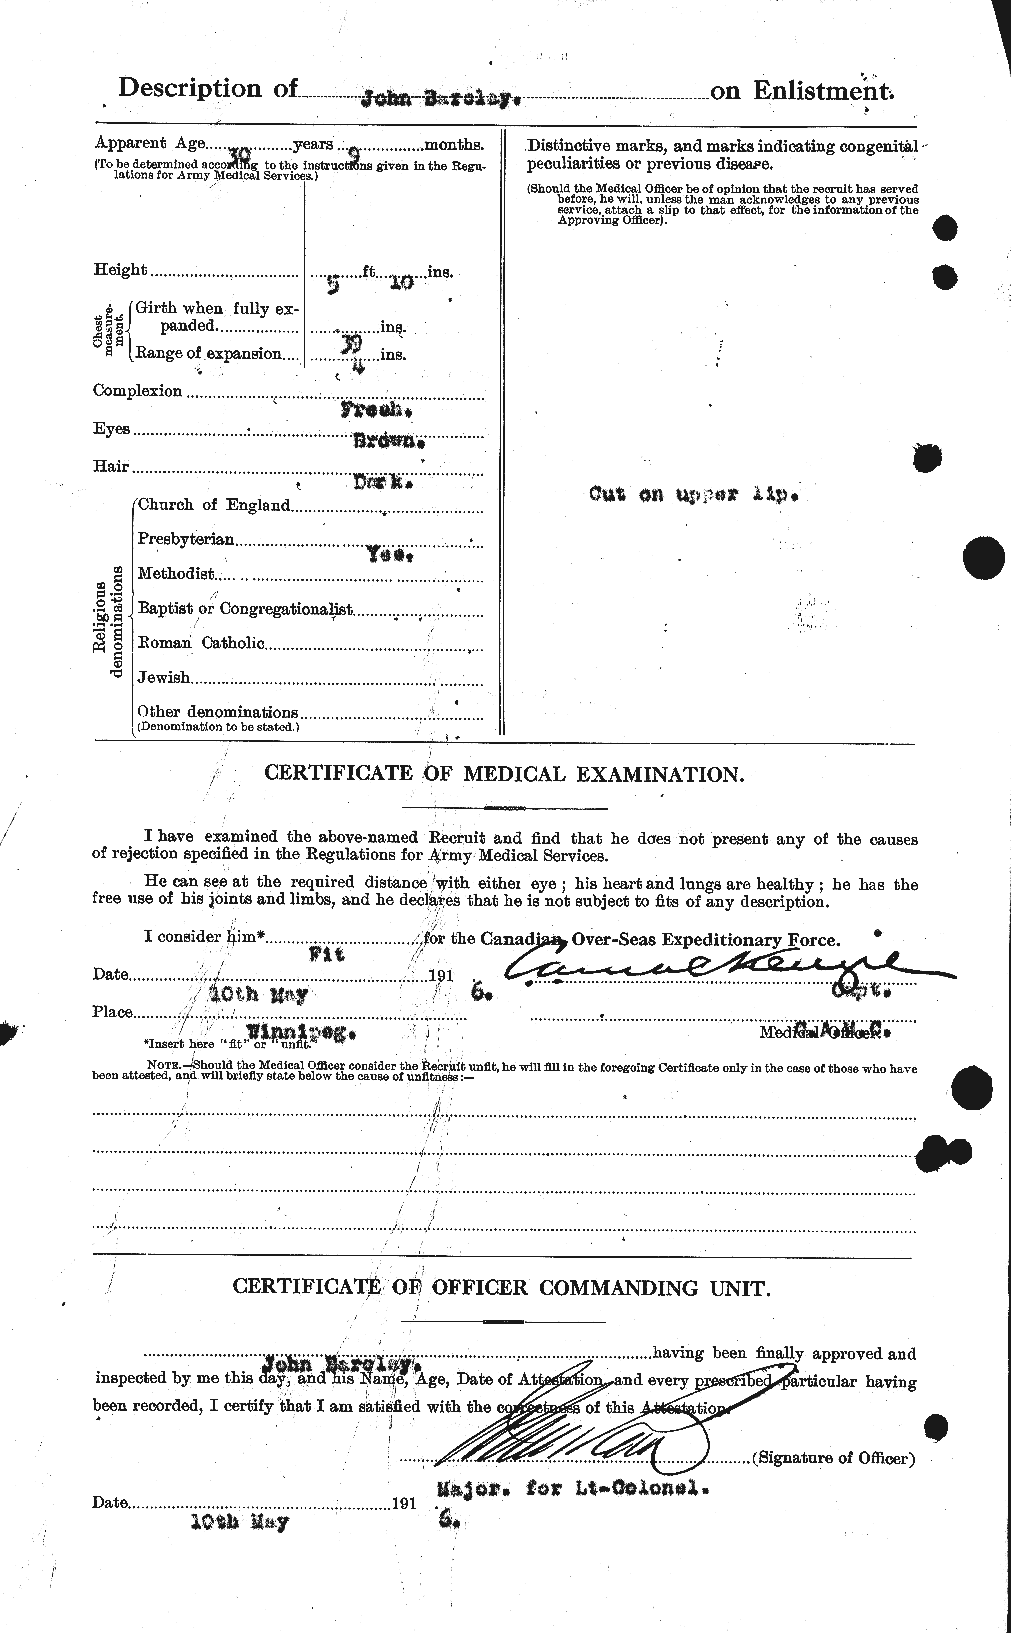 Personnel Records of the First World War - CEF 220901b